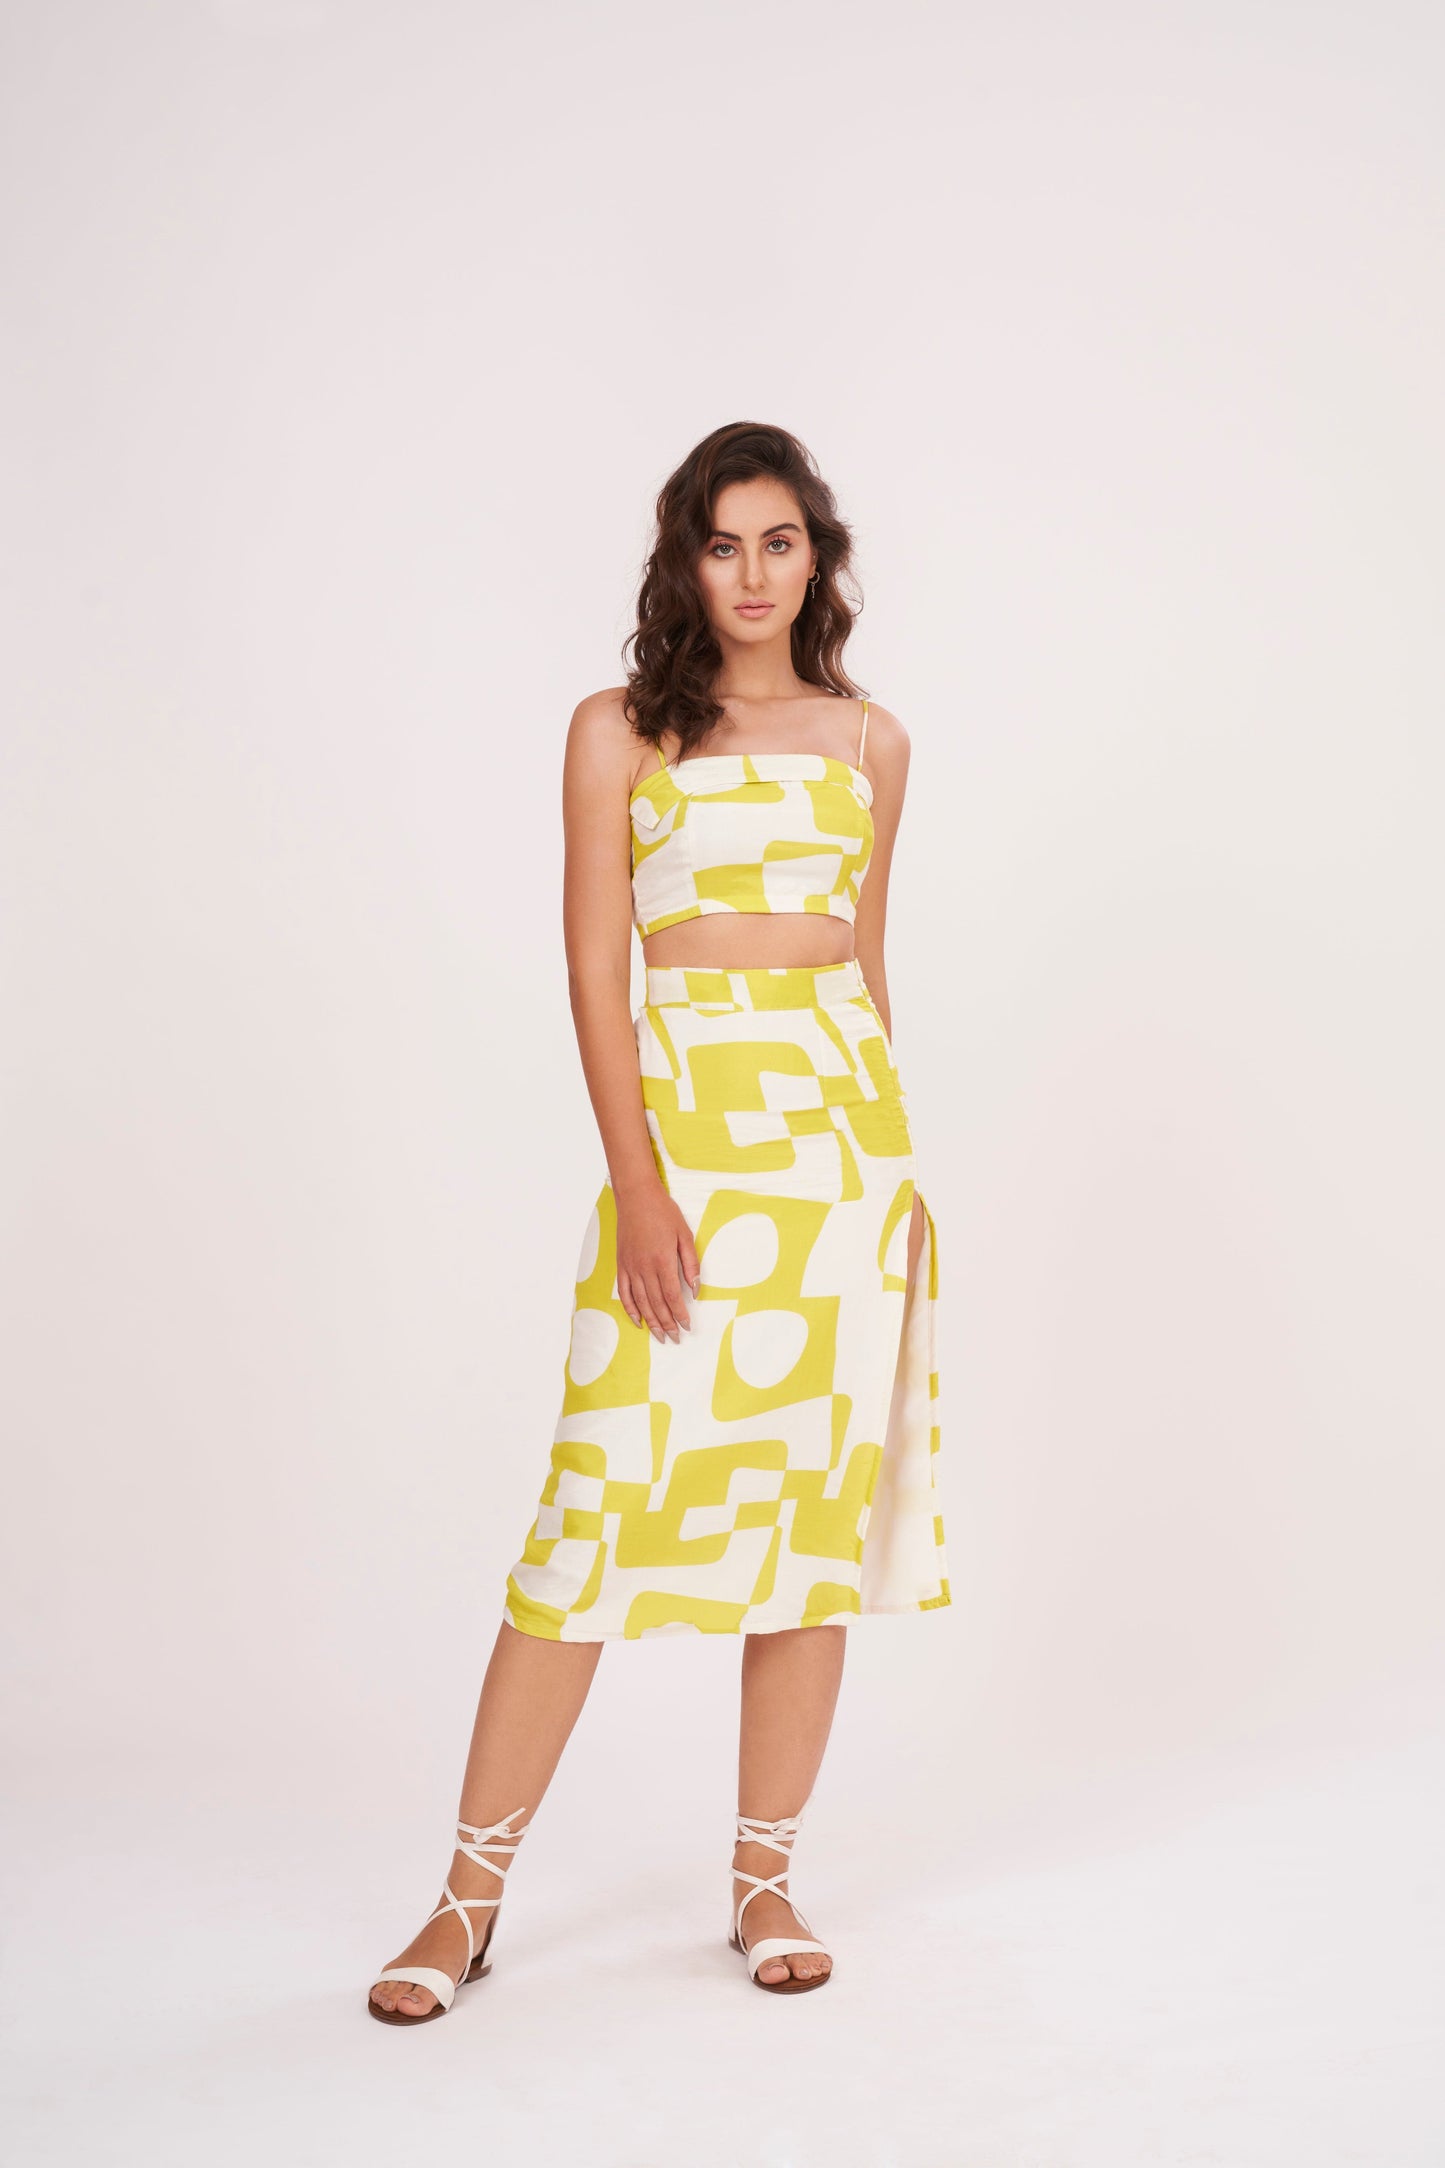 Chic Yellow Printed Strappy Crop Top crafted from lightweight, premium muslin fabric, perfect for summer wardrobe. Versatile